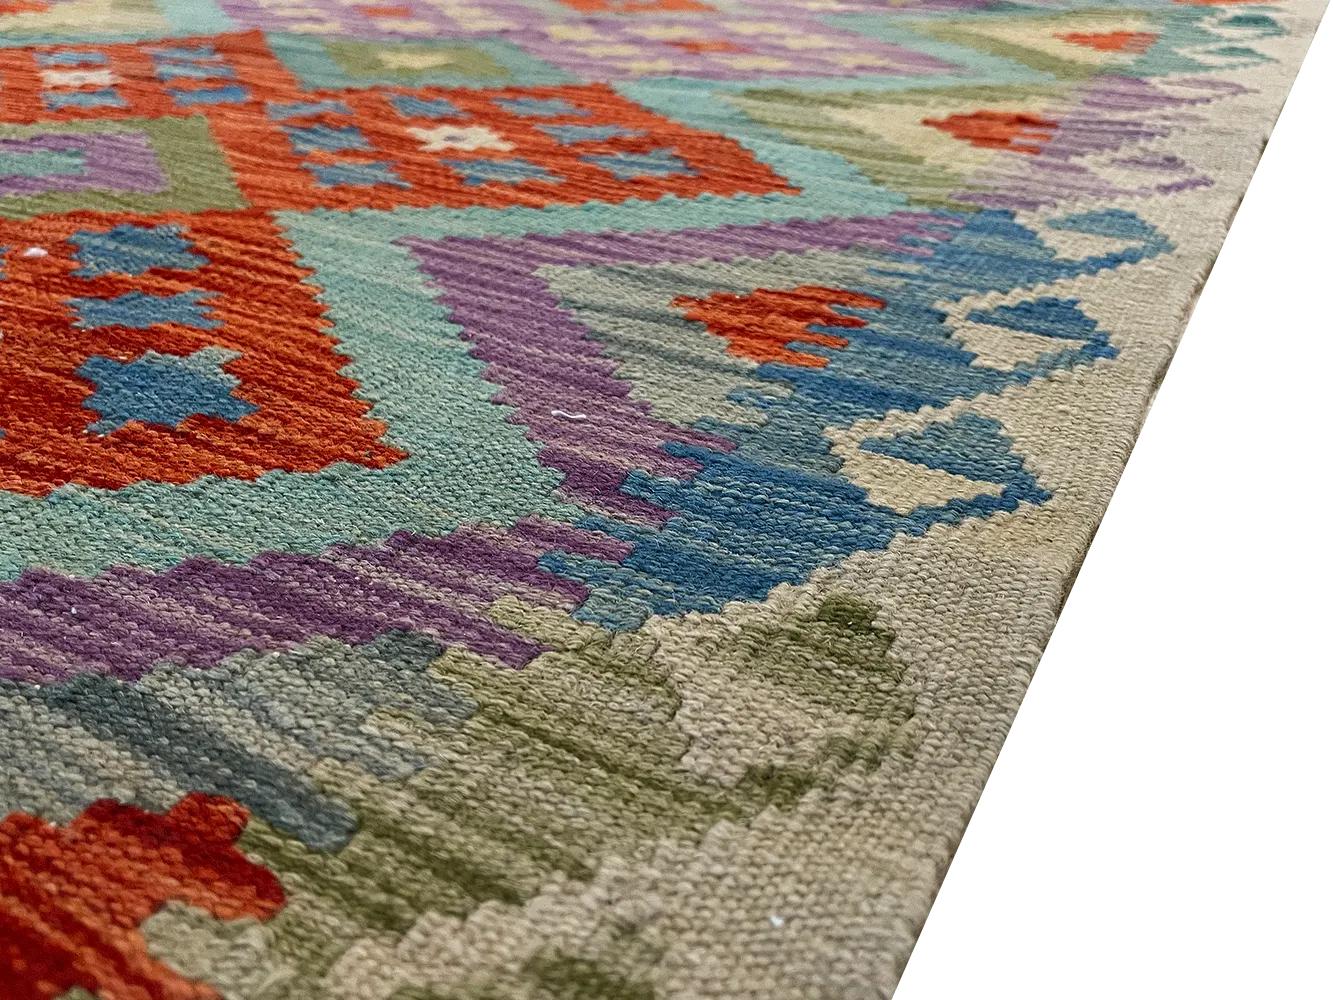 Hand-Woven All Wool Colorful Kilim Runner 2' 10